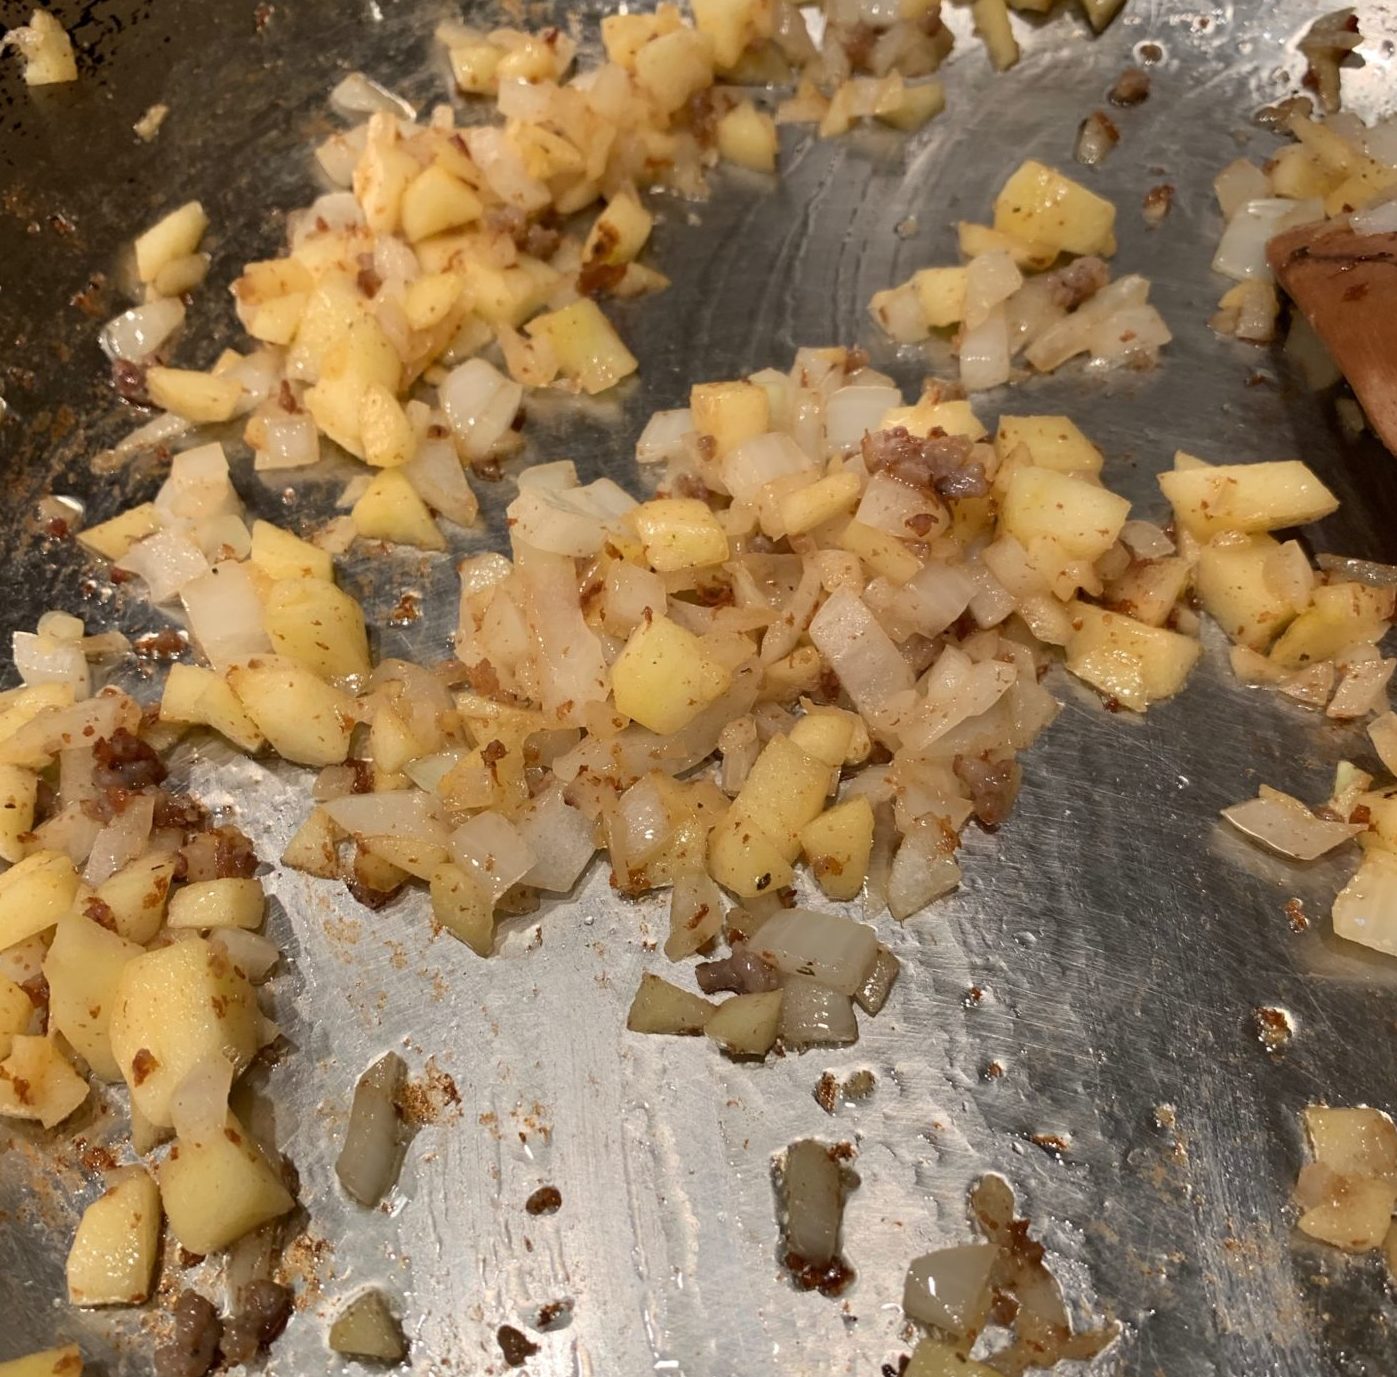 Onions cooked until translucent with apple bits